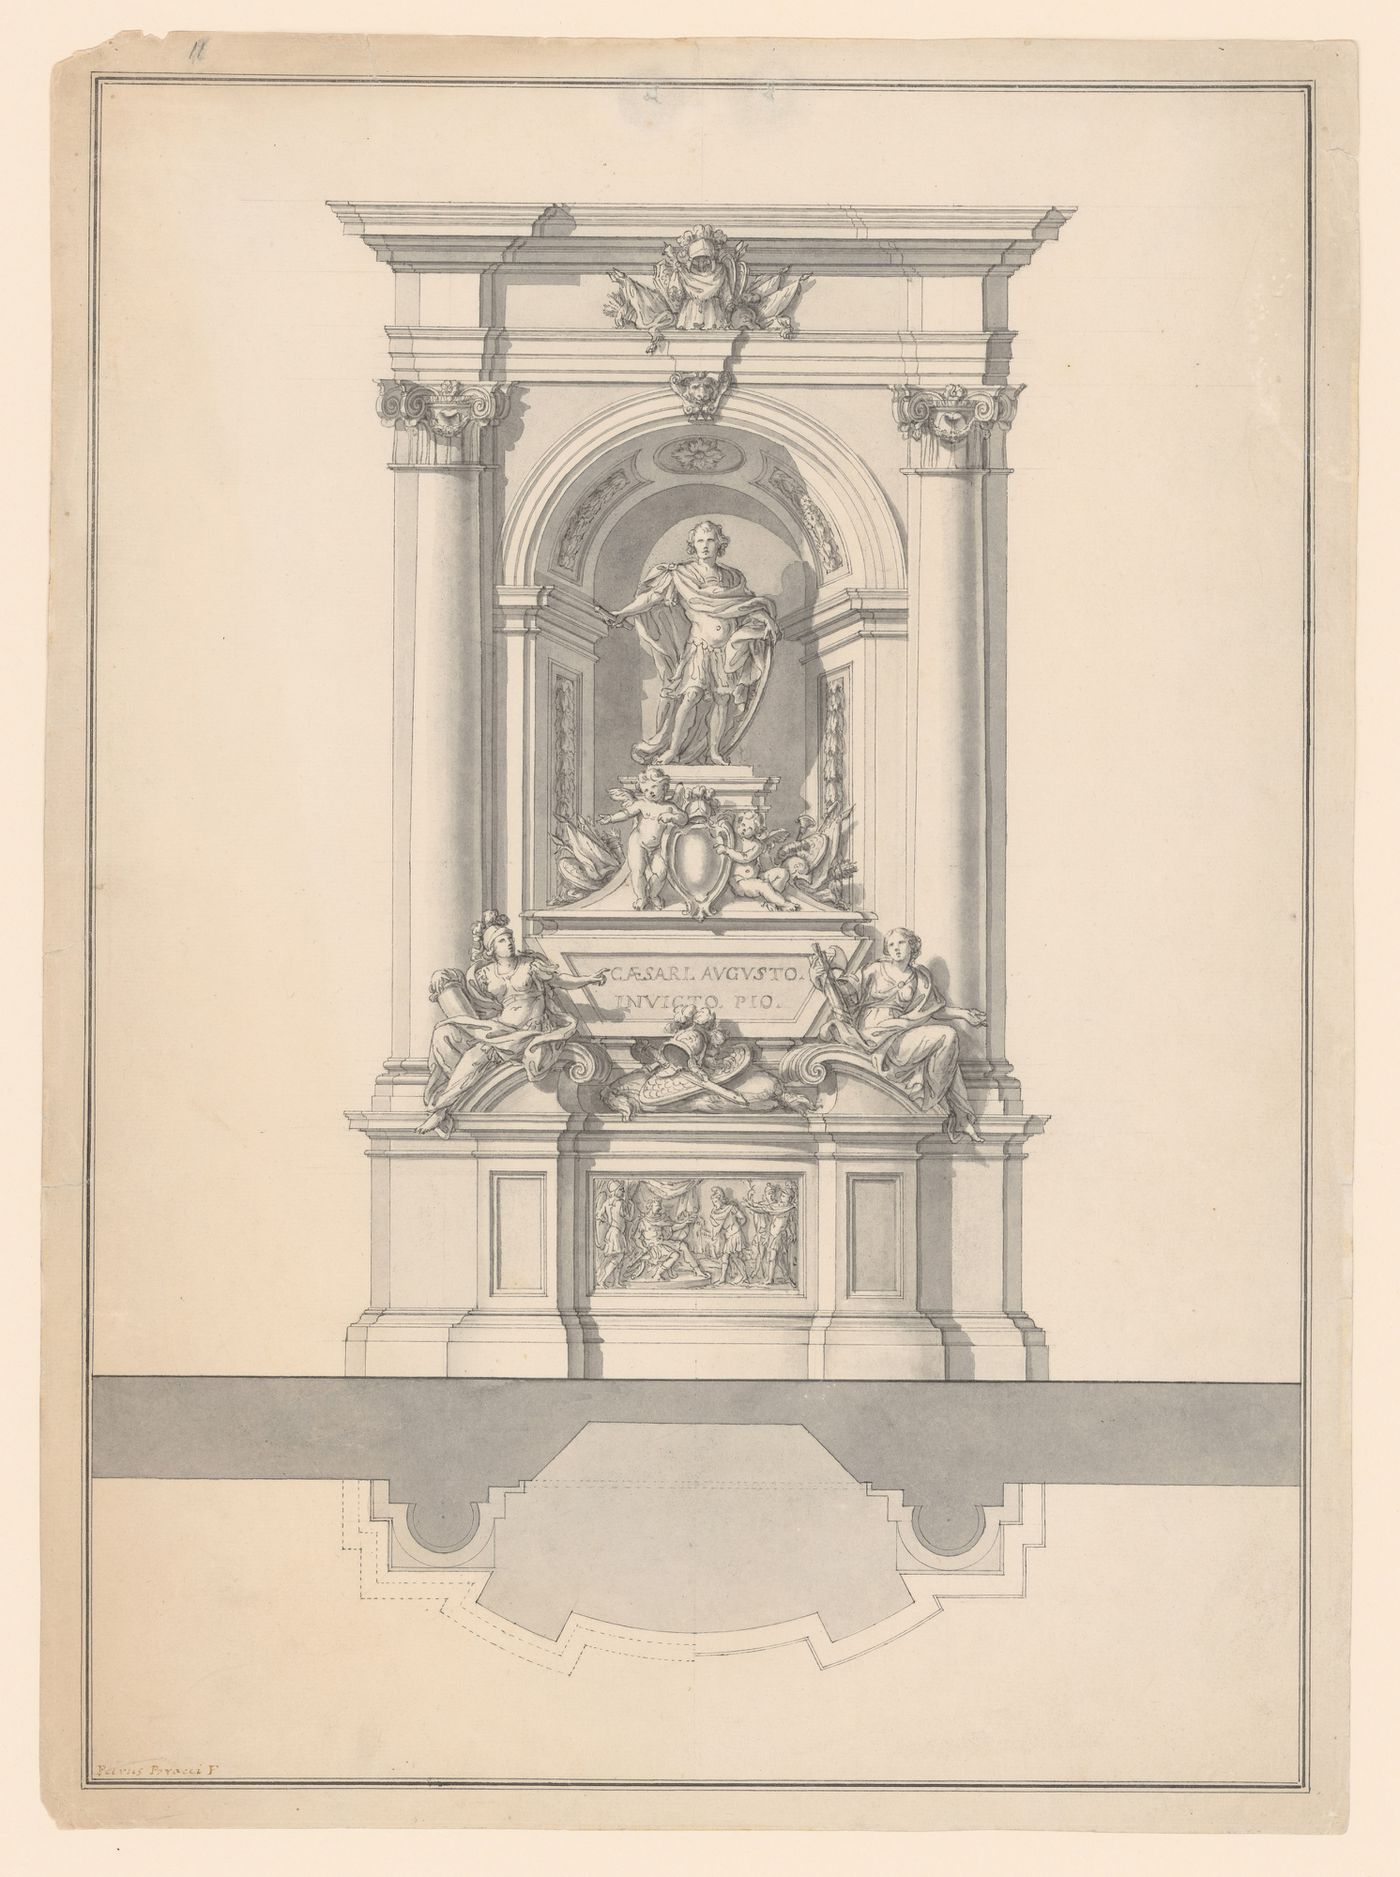 Elevation and plan for a monument for a secular ruler